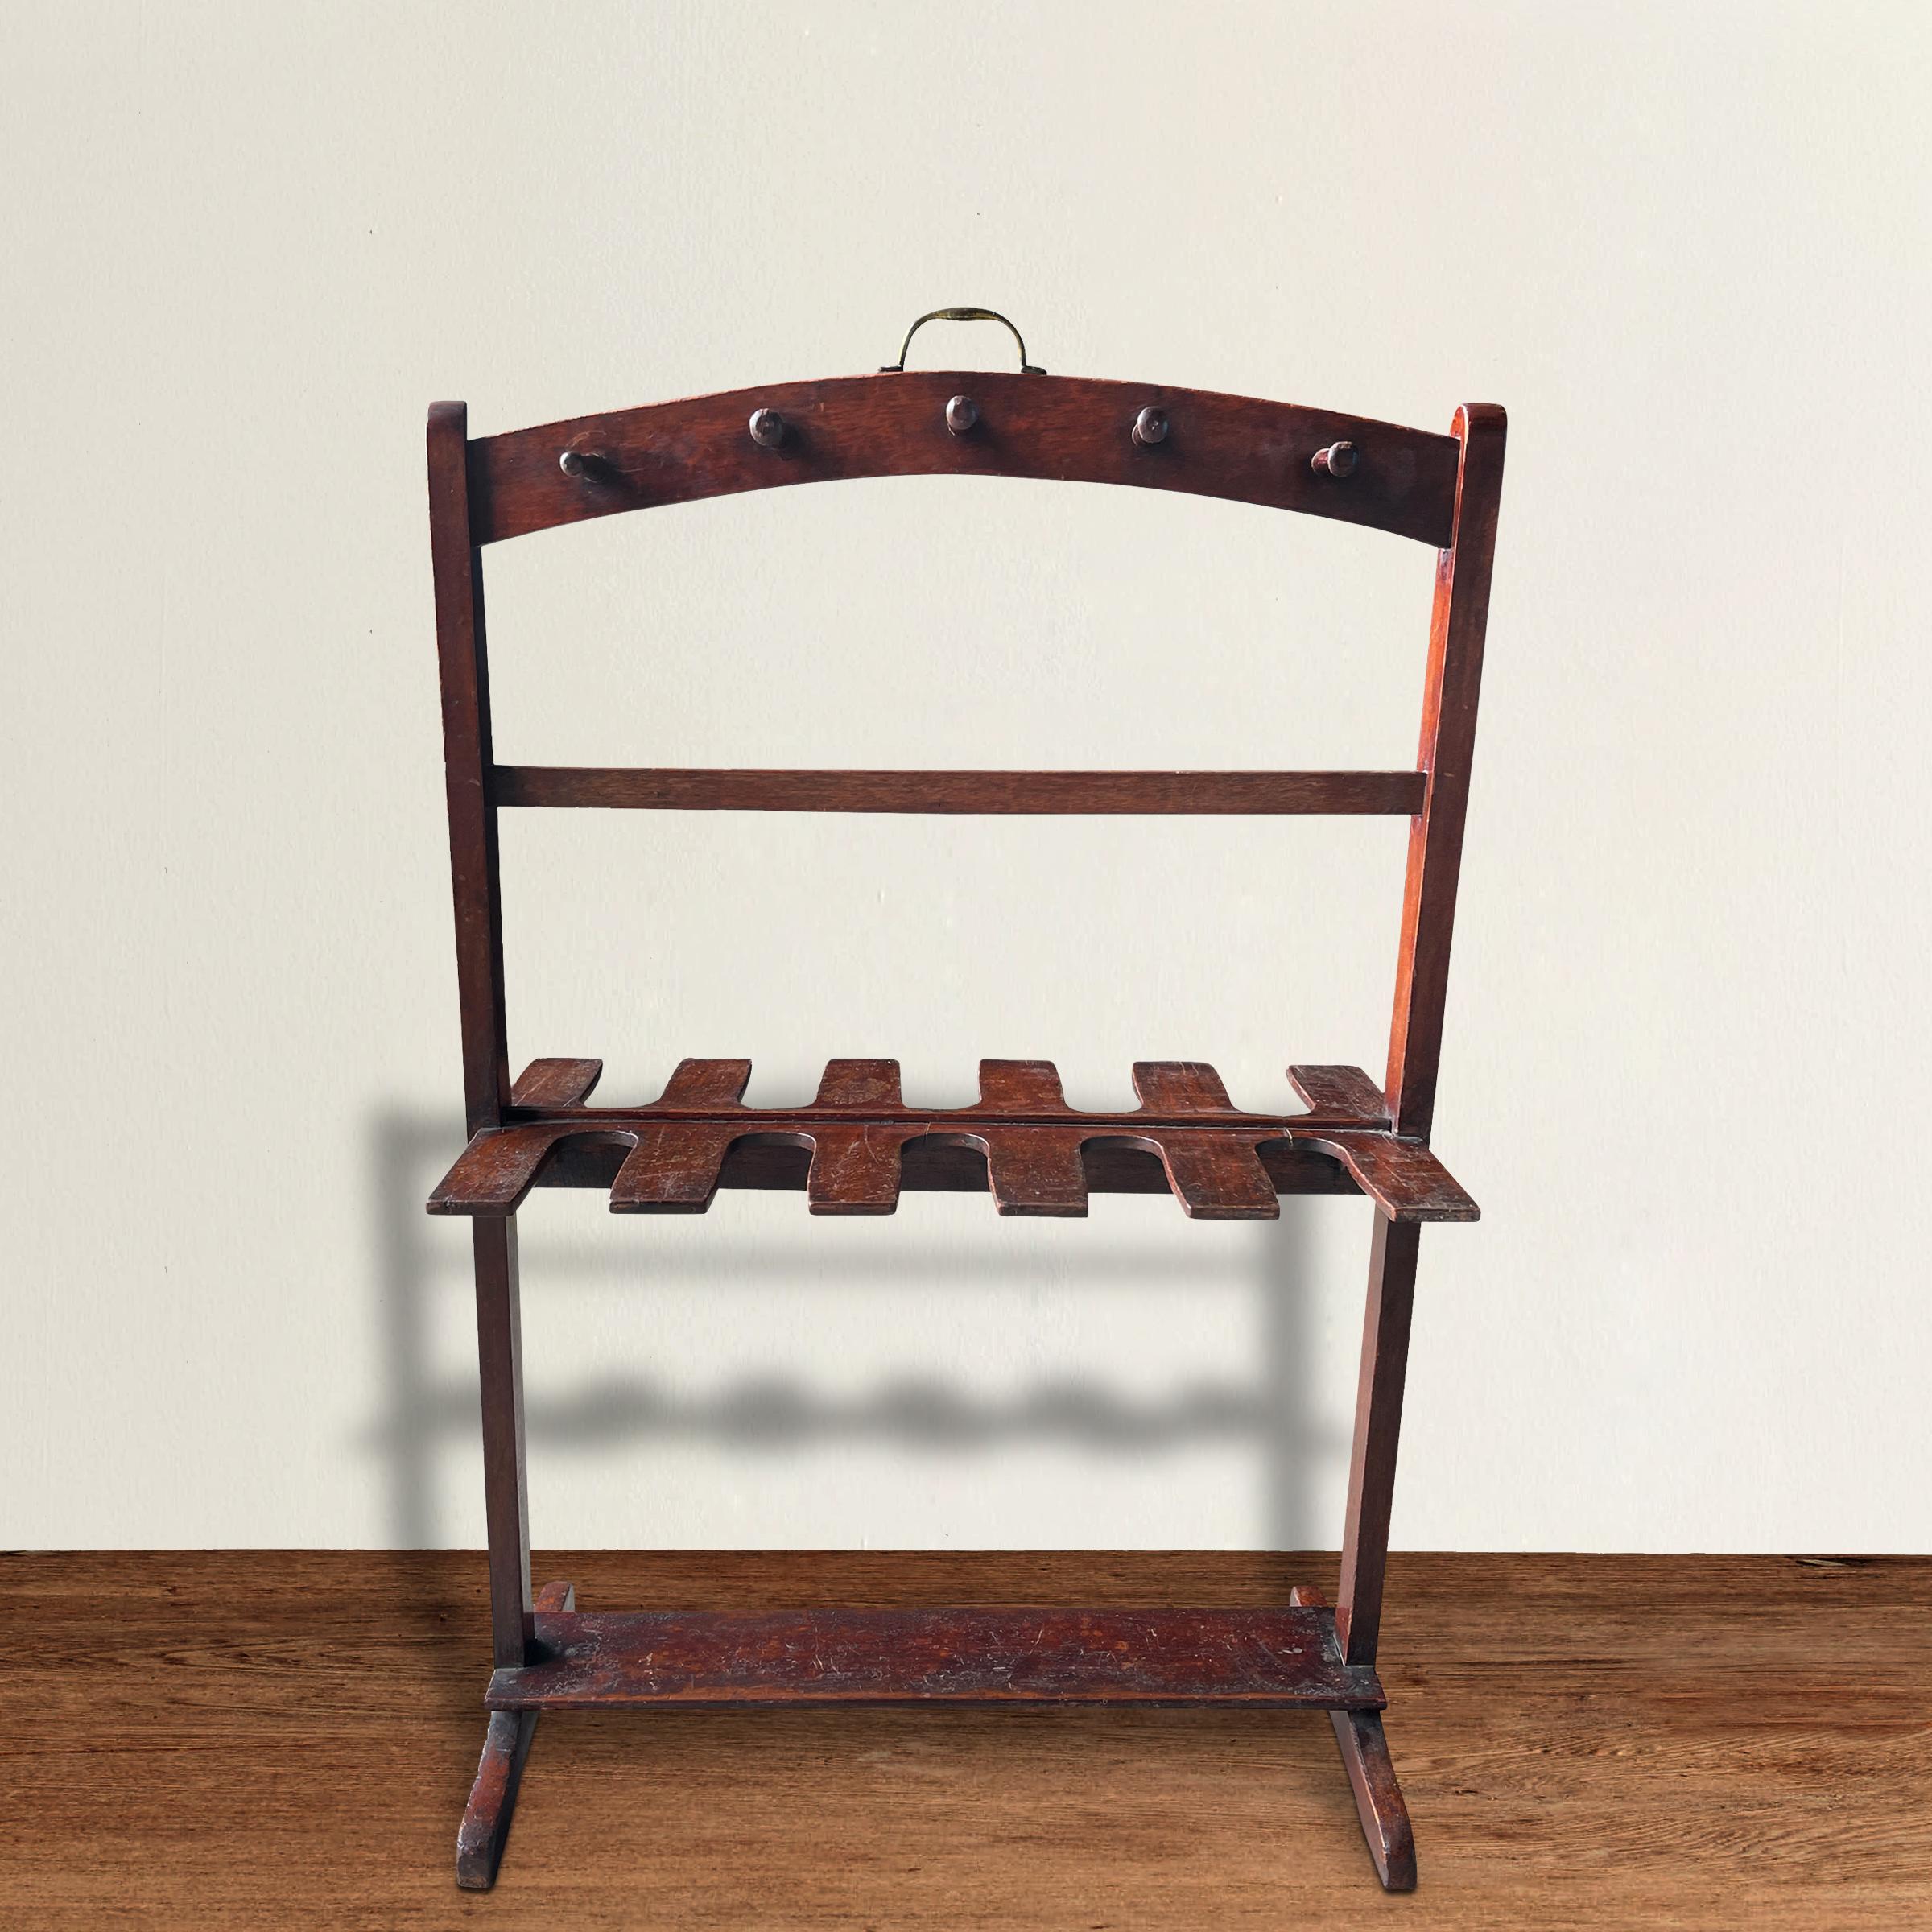 A wonderful early 20th century English Edwardian mahogany boot rack with enough space for five pairs of boots, and ten pegs traditionally used for holding horse whips but can perfect for holding hats, purses, and/or umbrellas.